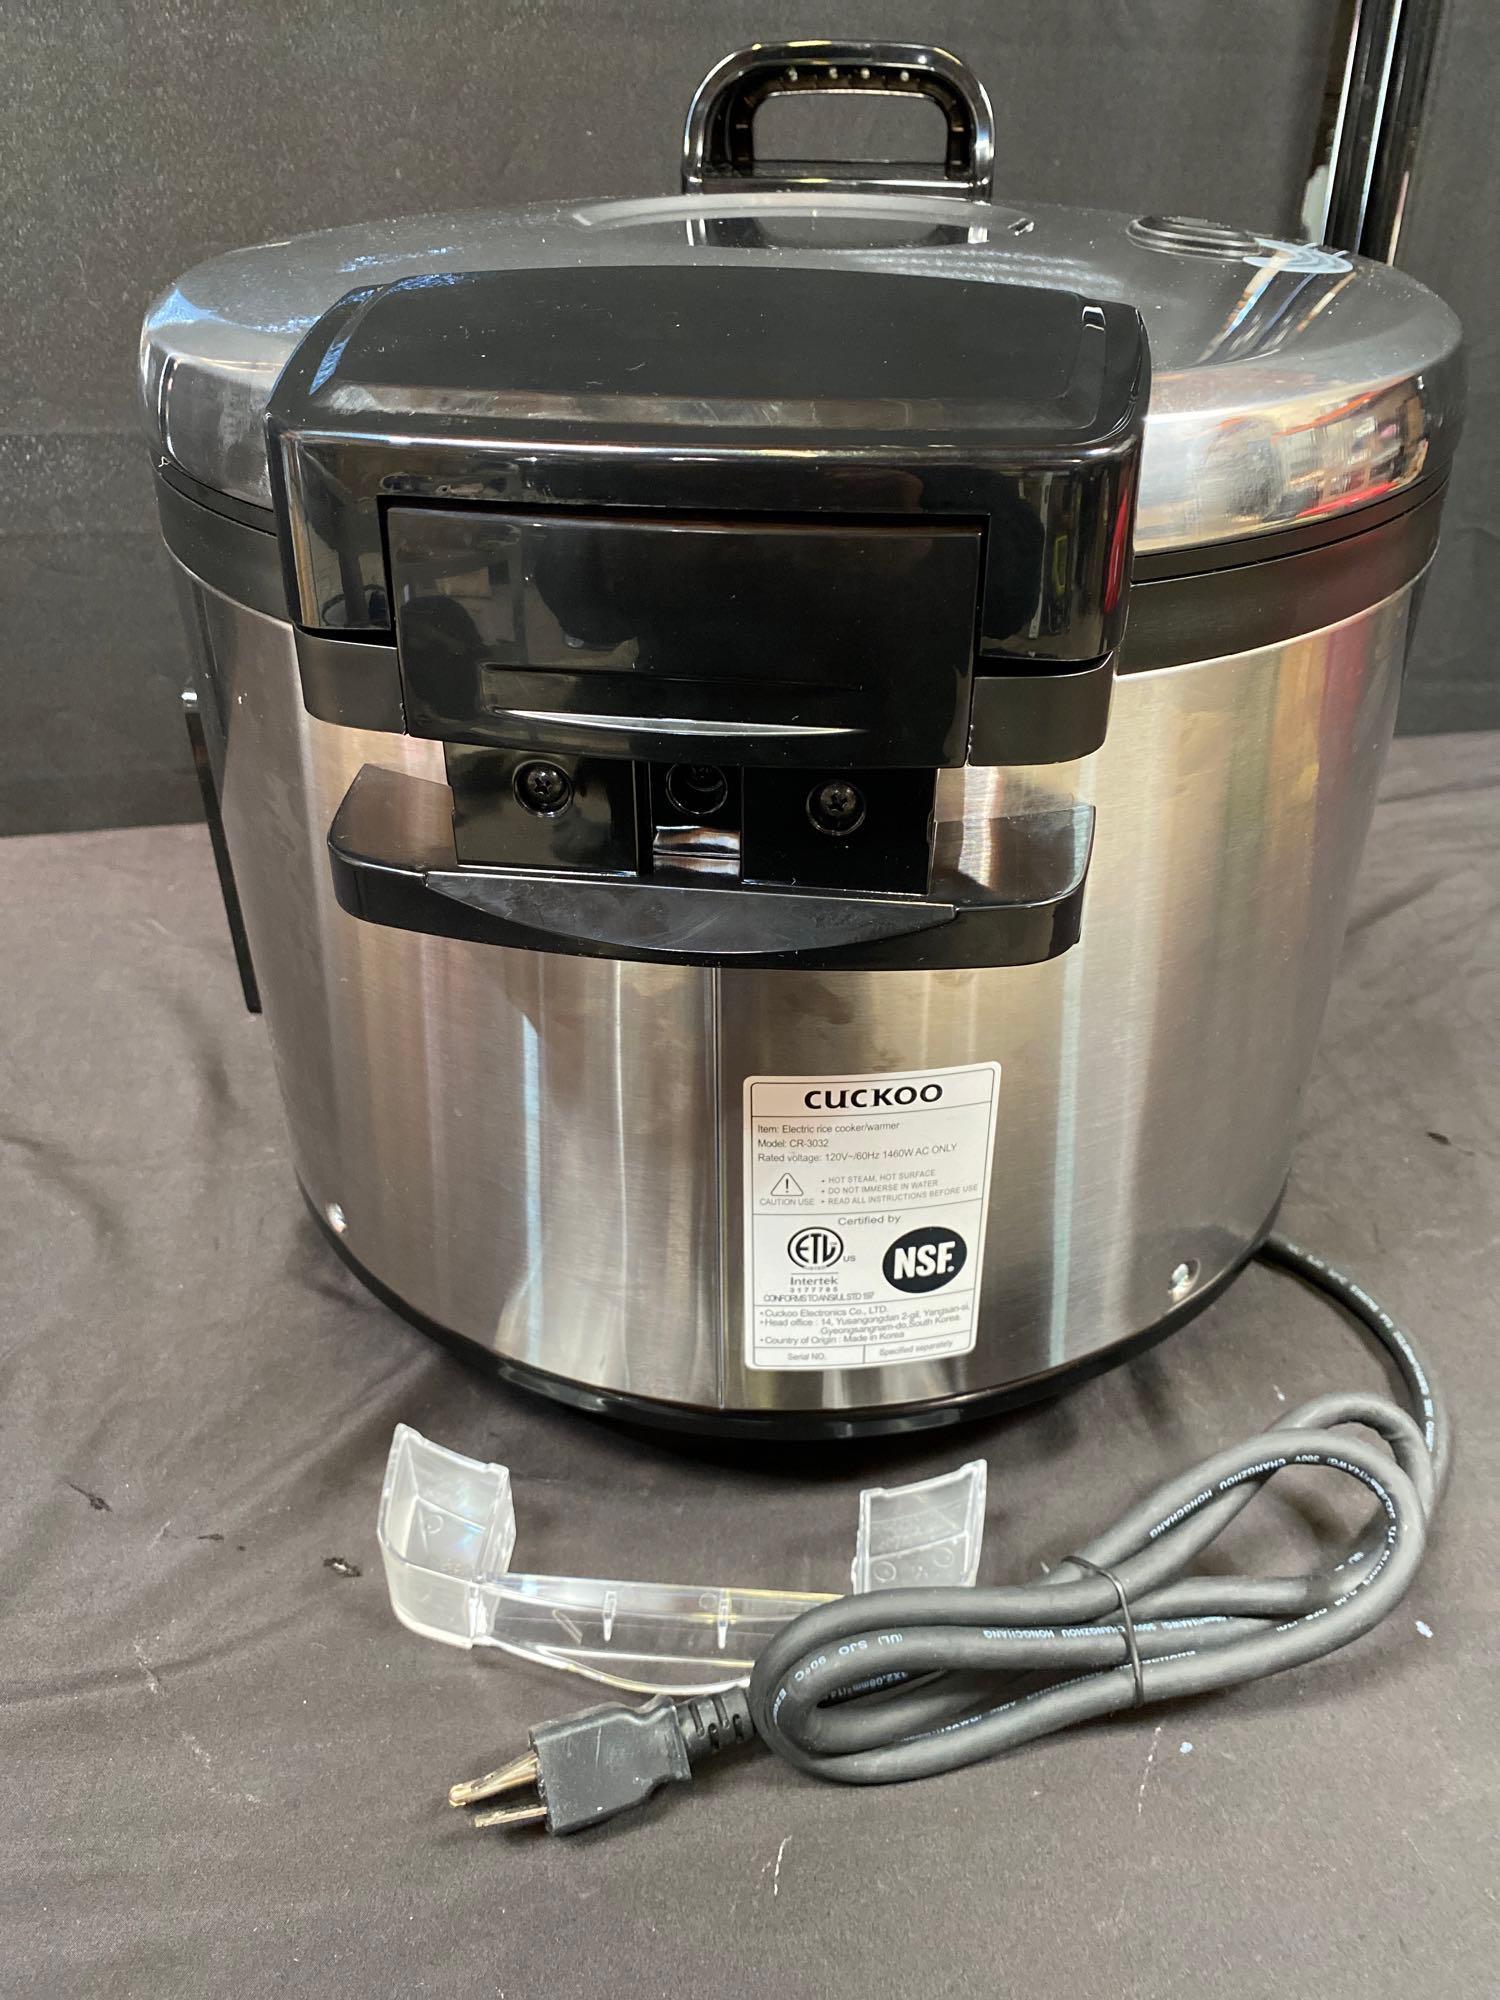 Cuckoo CR-3032 30 Cup Commercial Electric Warmer Rice Cooker - Silver